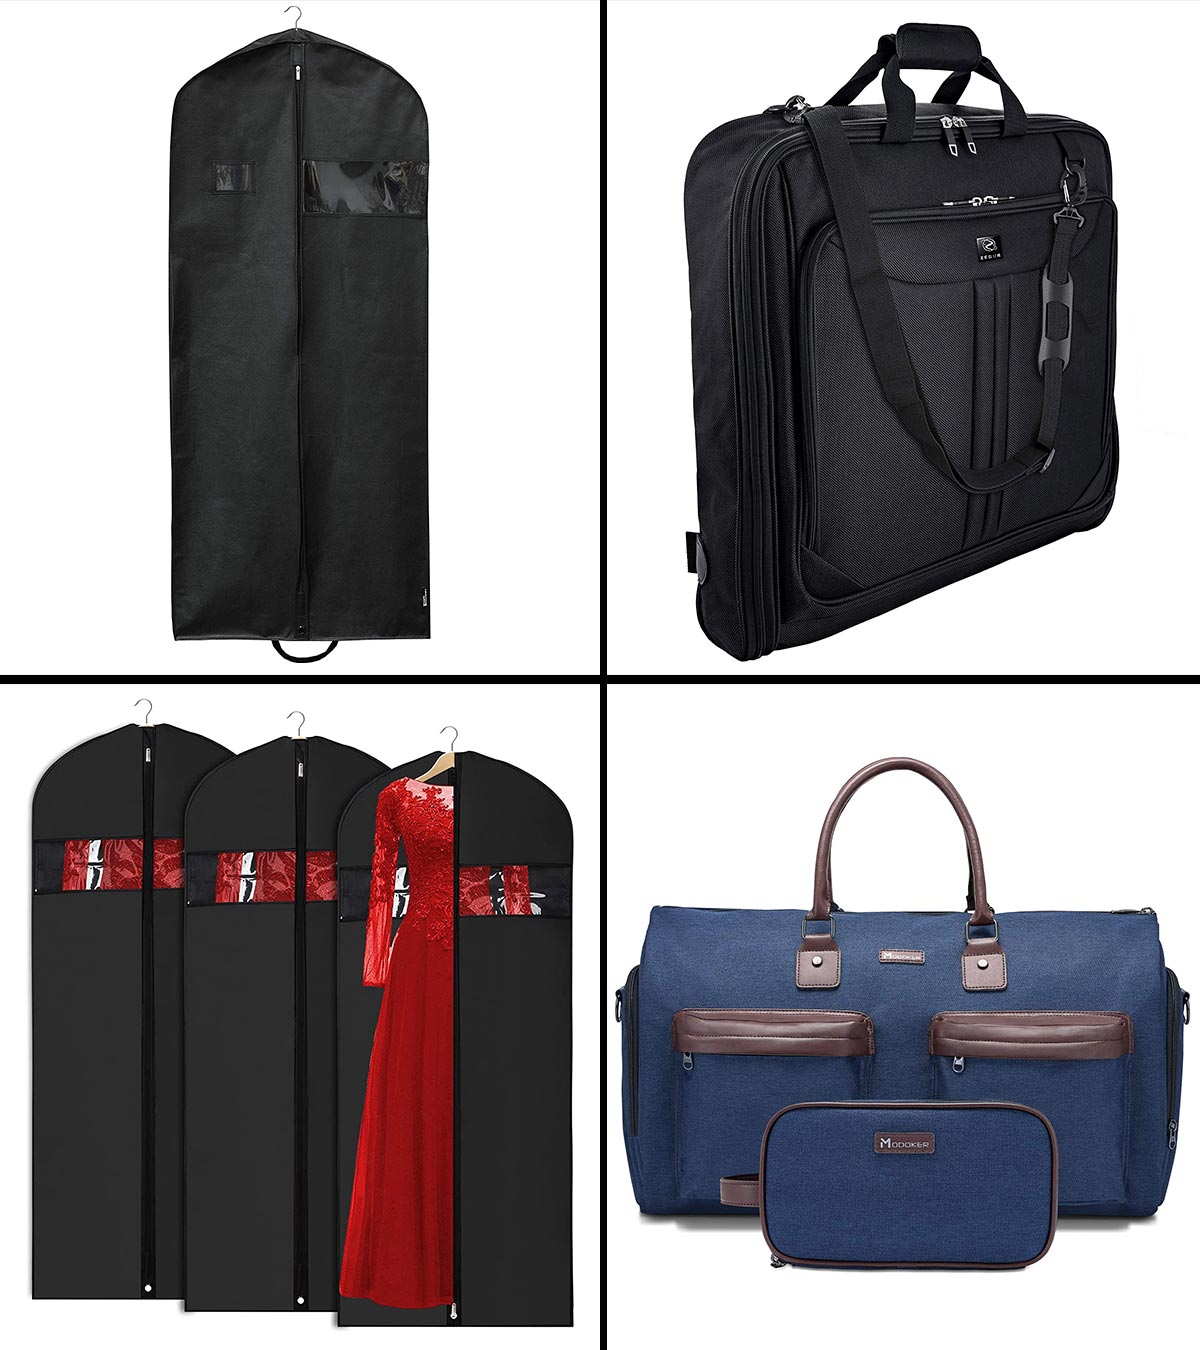 Suit Travel Bag Black Suit Travel Bag Carrier Luggage with Shoe Pouch and Detachable Shoulder Strap Carry on Garment Bag for Travel or Sport Men and Women 